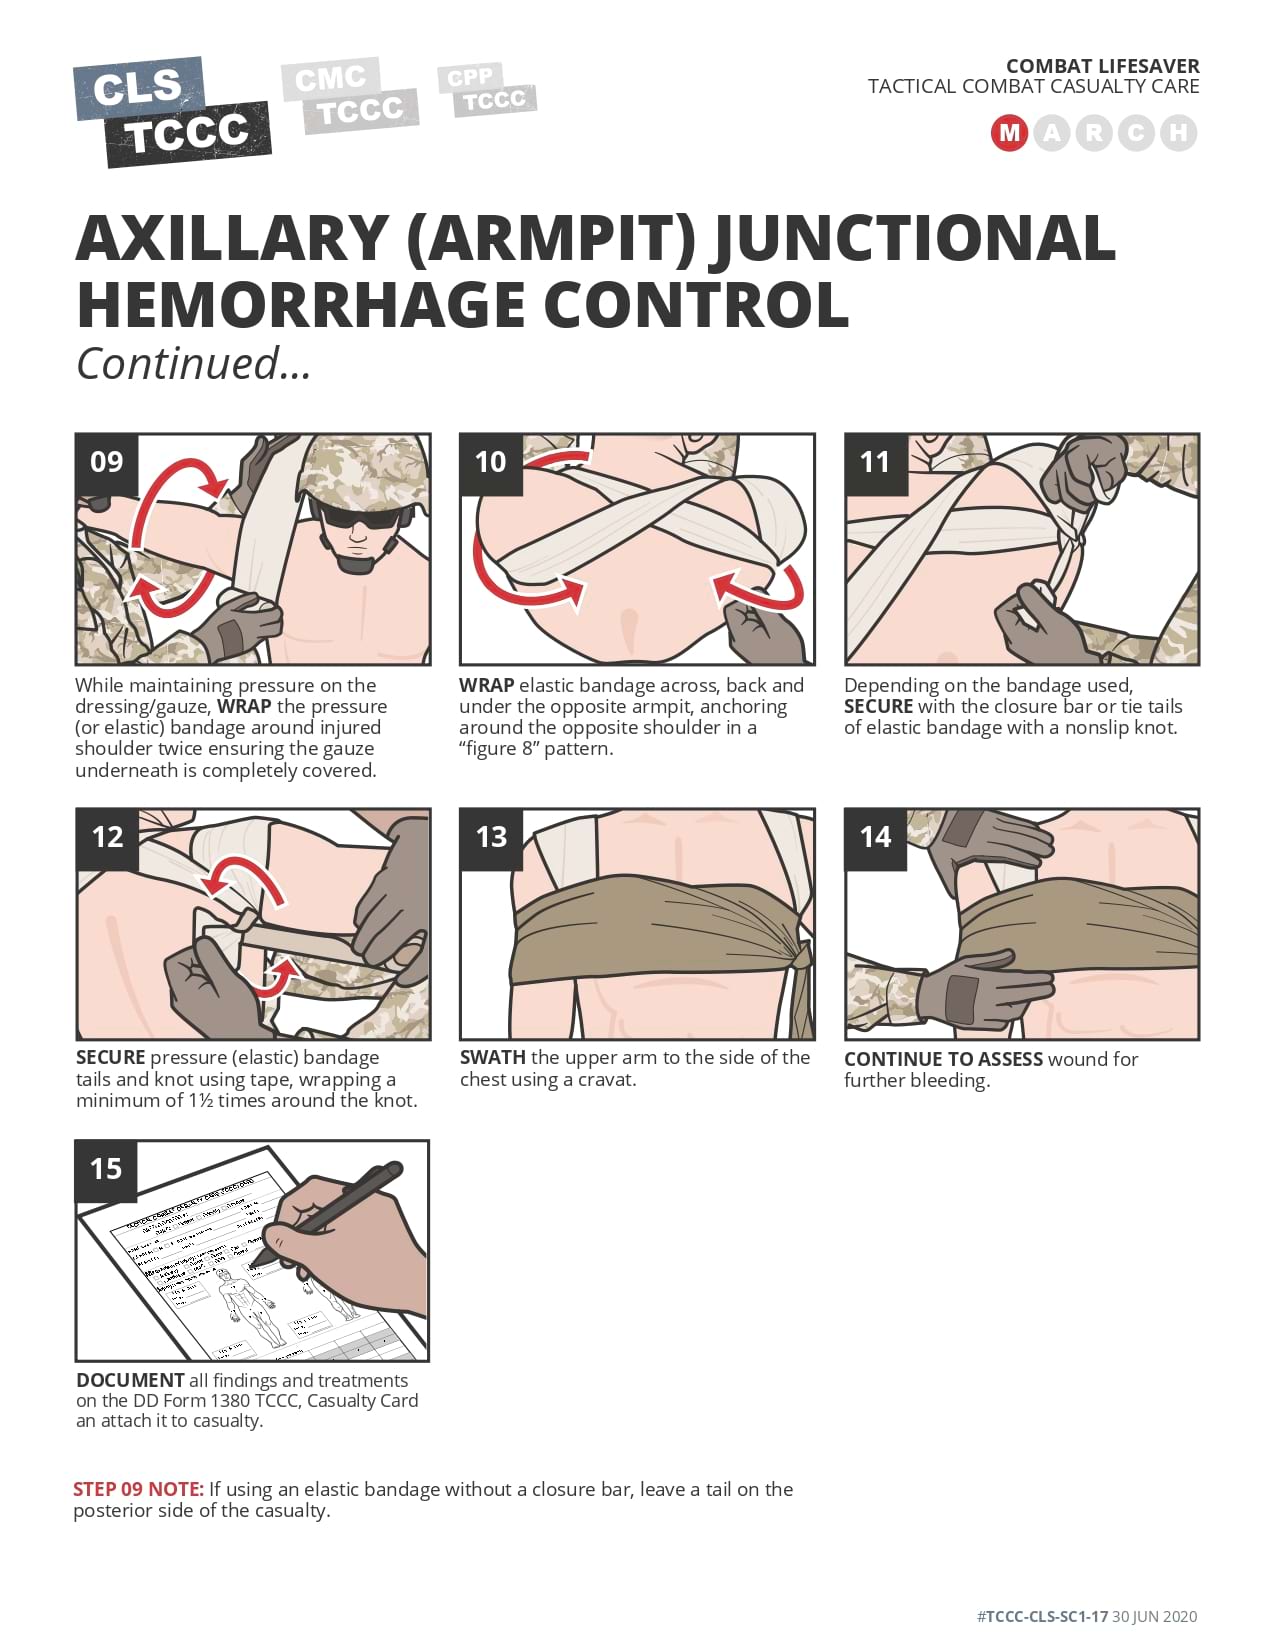 Axillary Junctional Hemorrhage Control, page 2